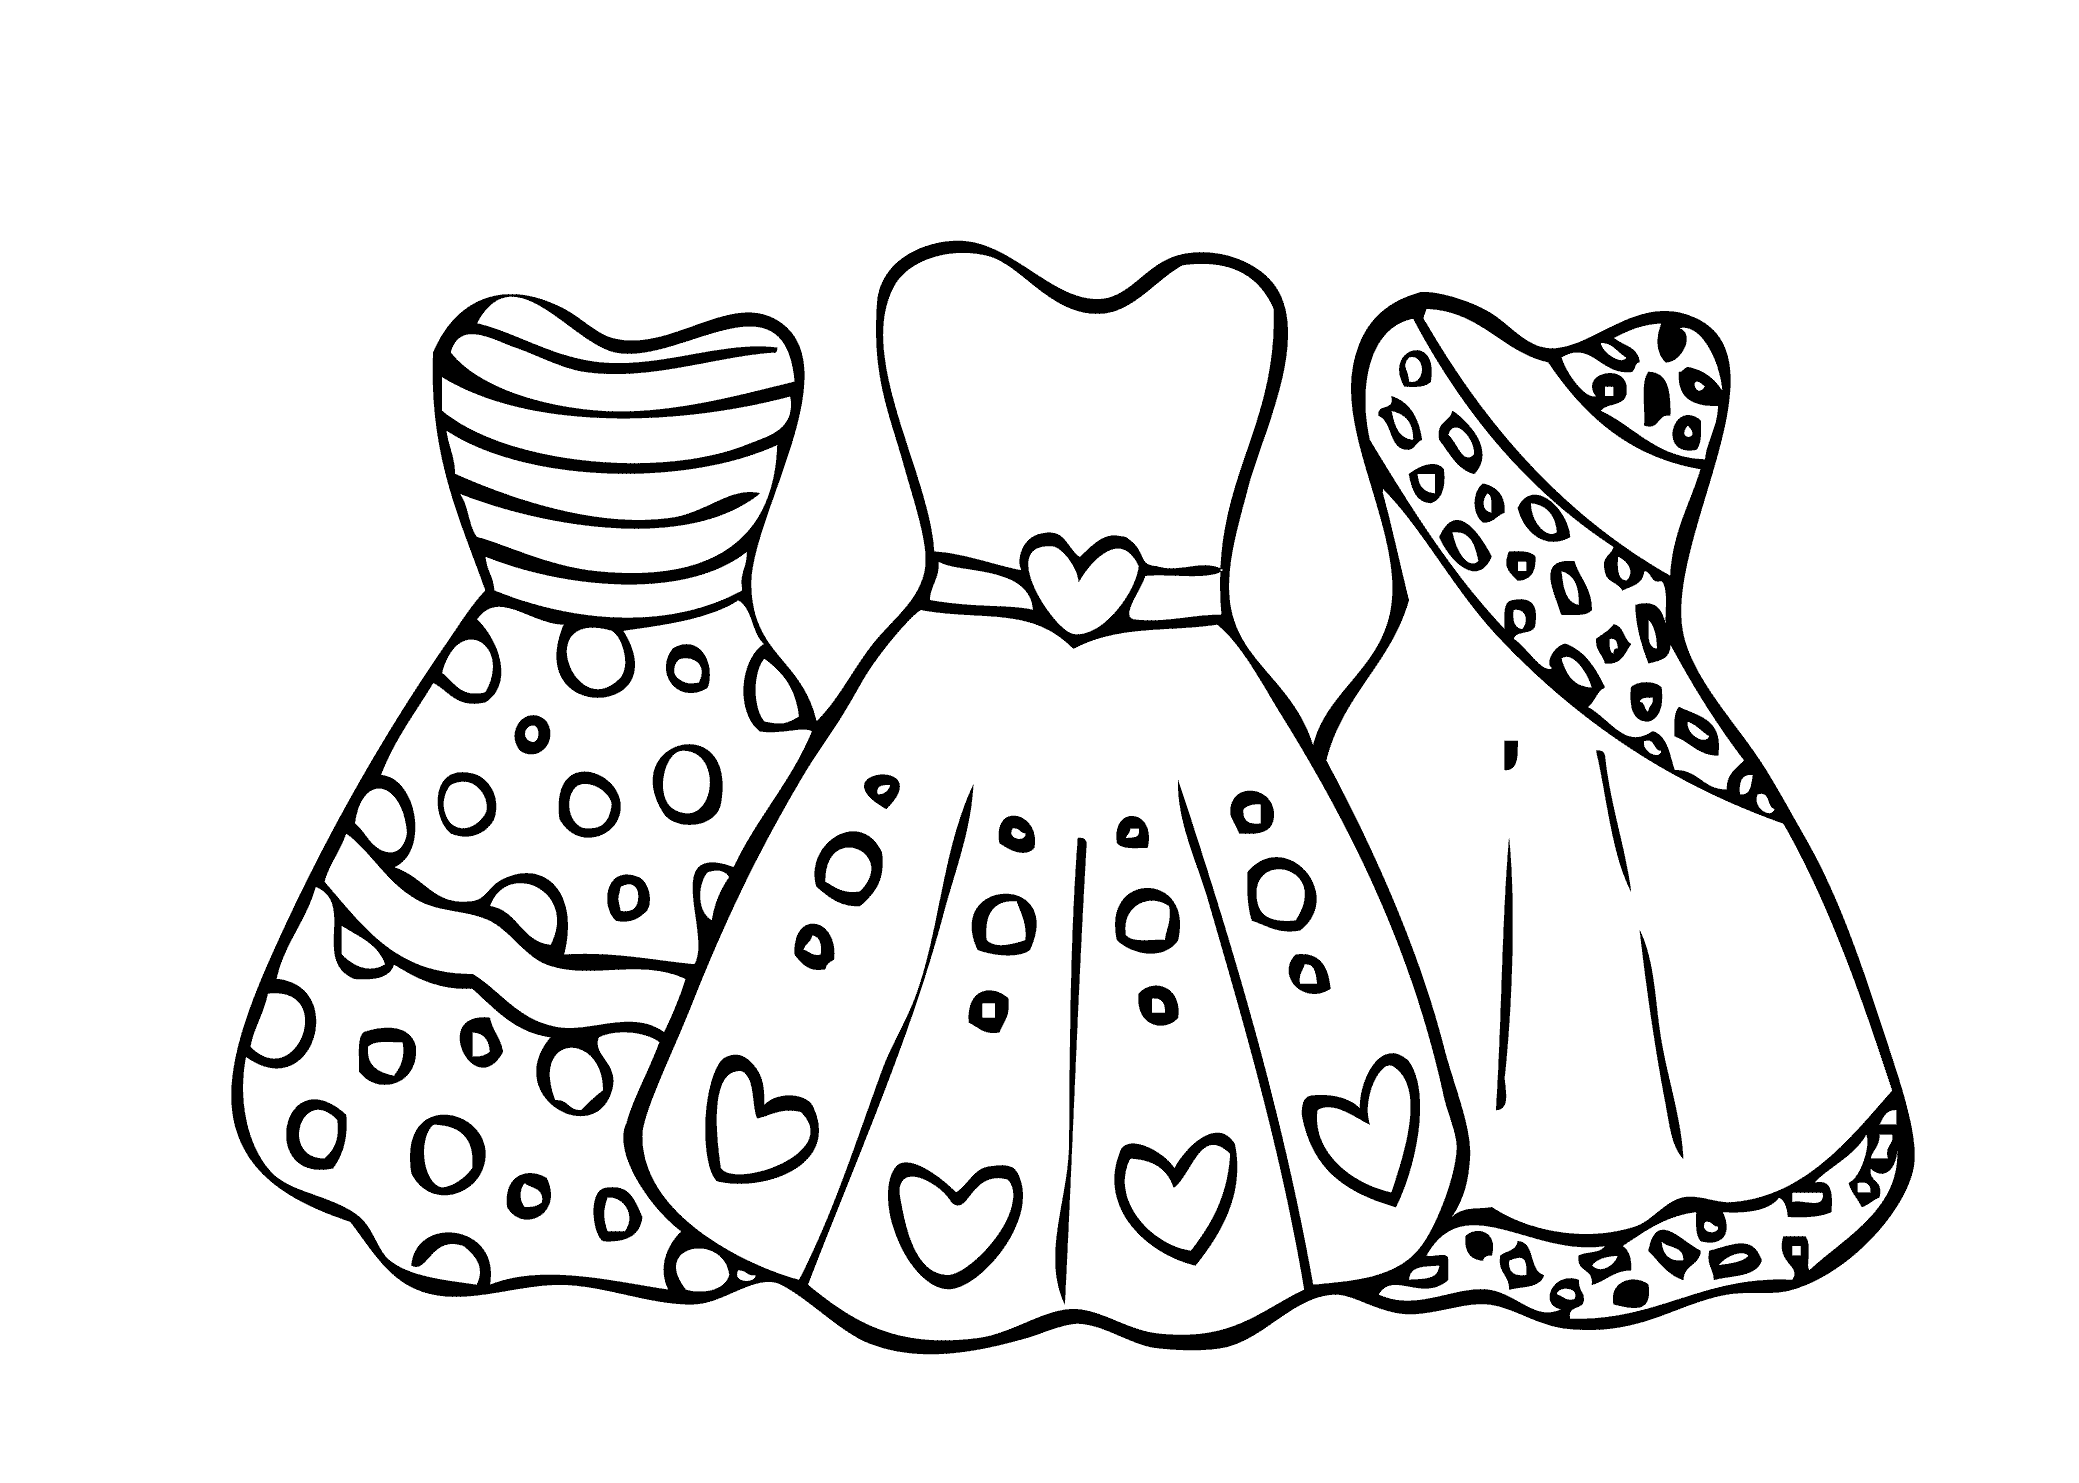 5 Beautiful Girls in a Gown Coloring Pages Printable Sheets Lovely for Girls 2021 09 767 Coloring4free